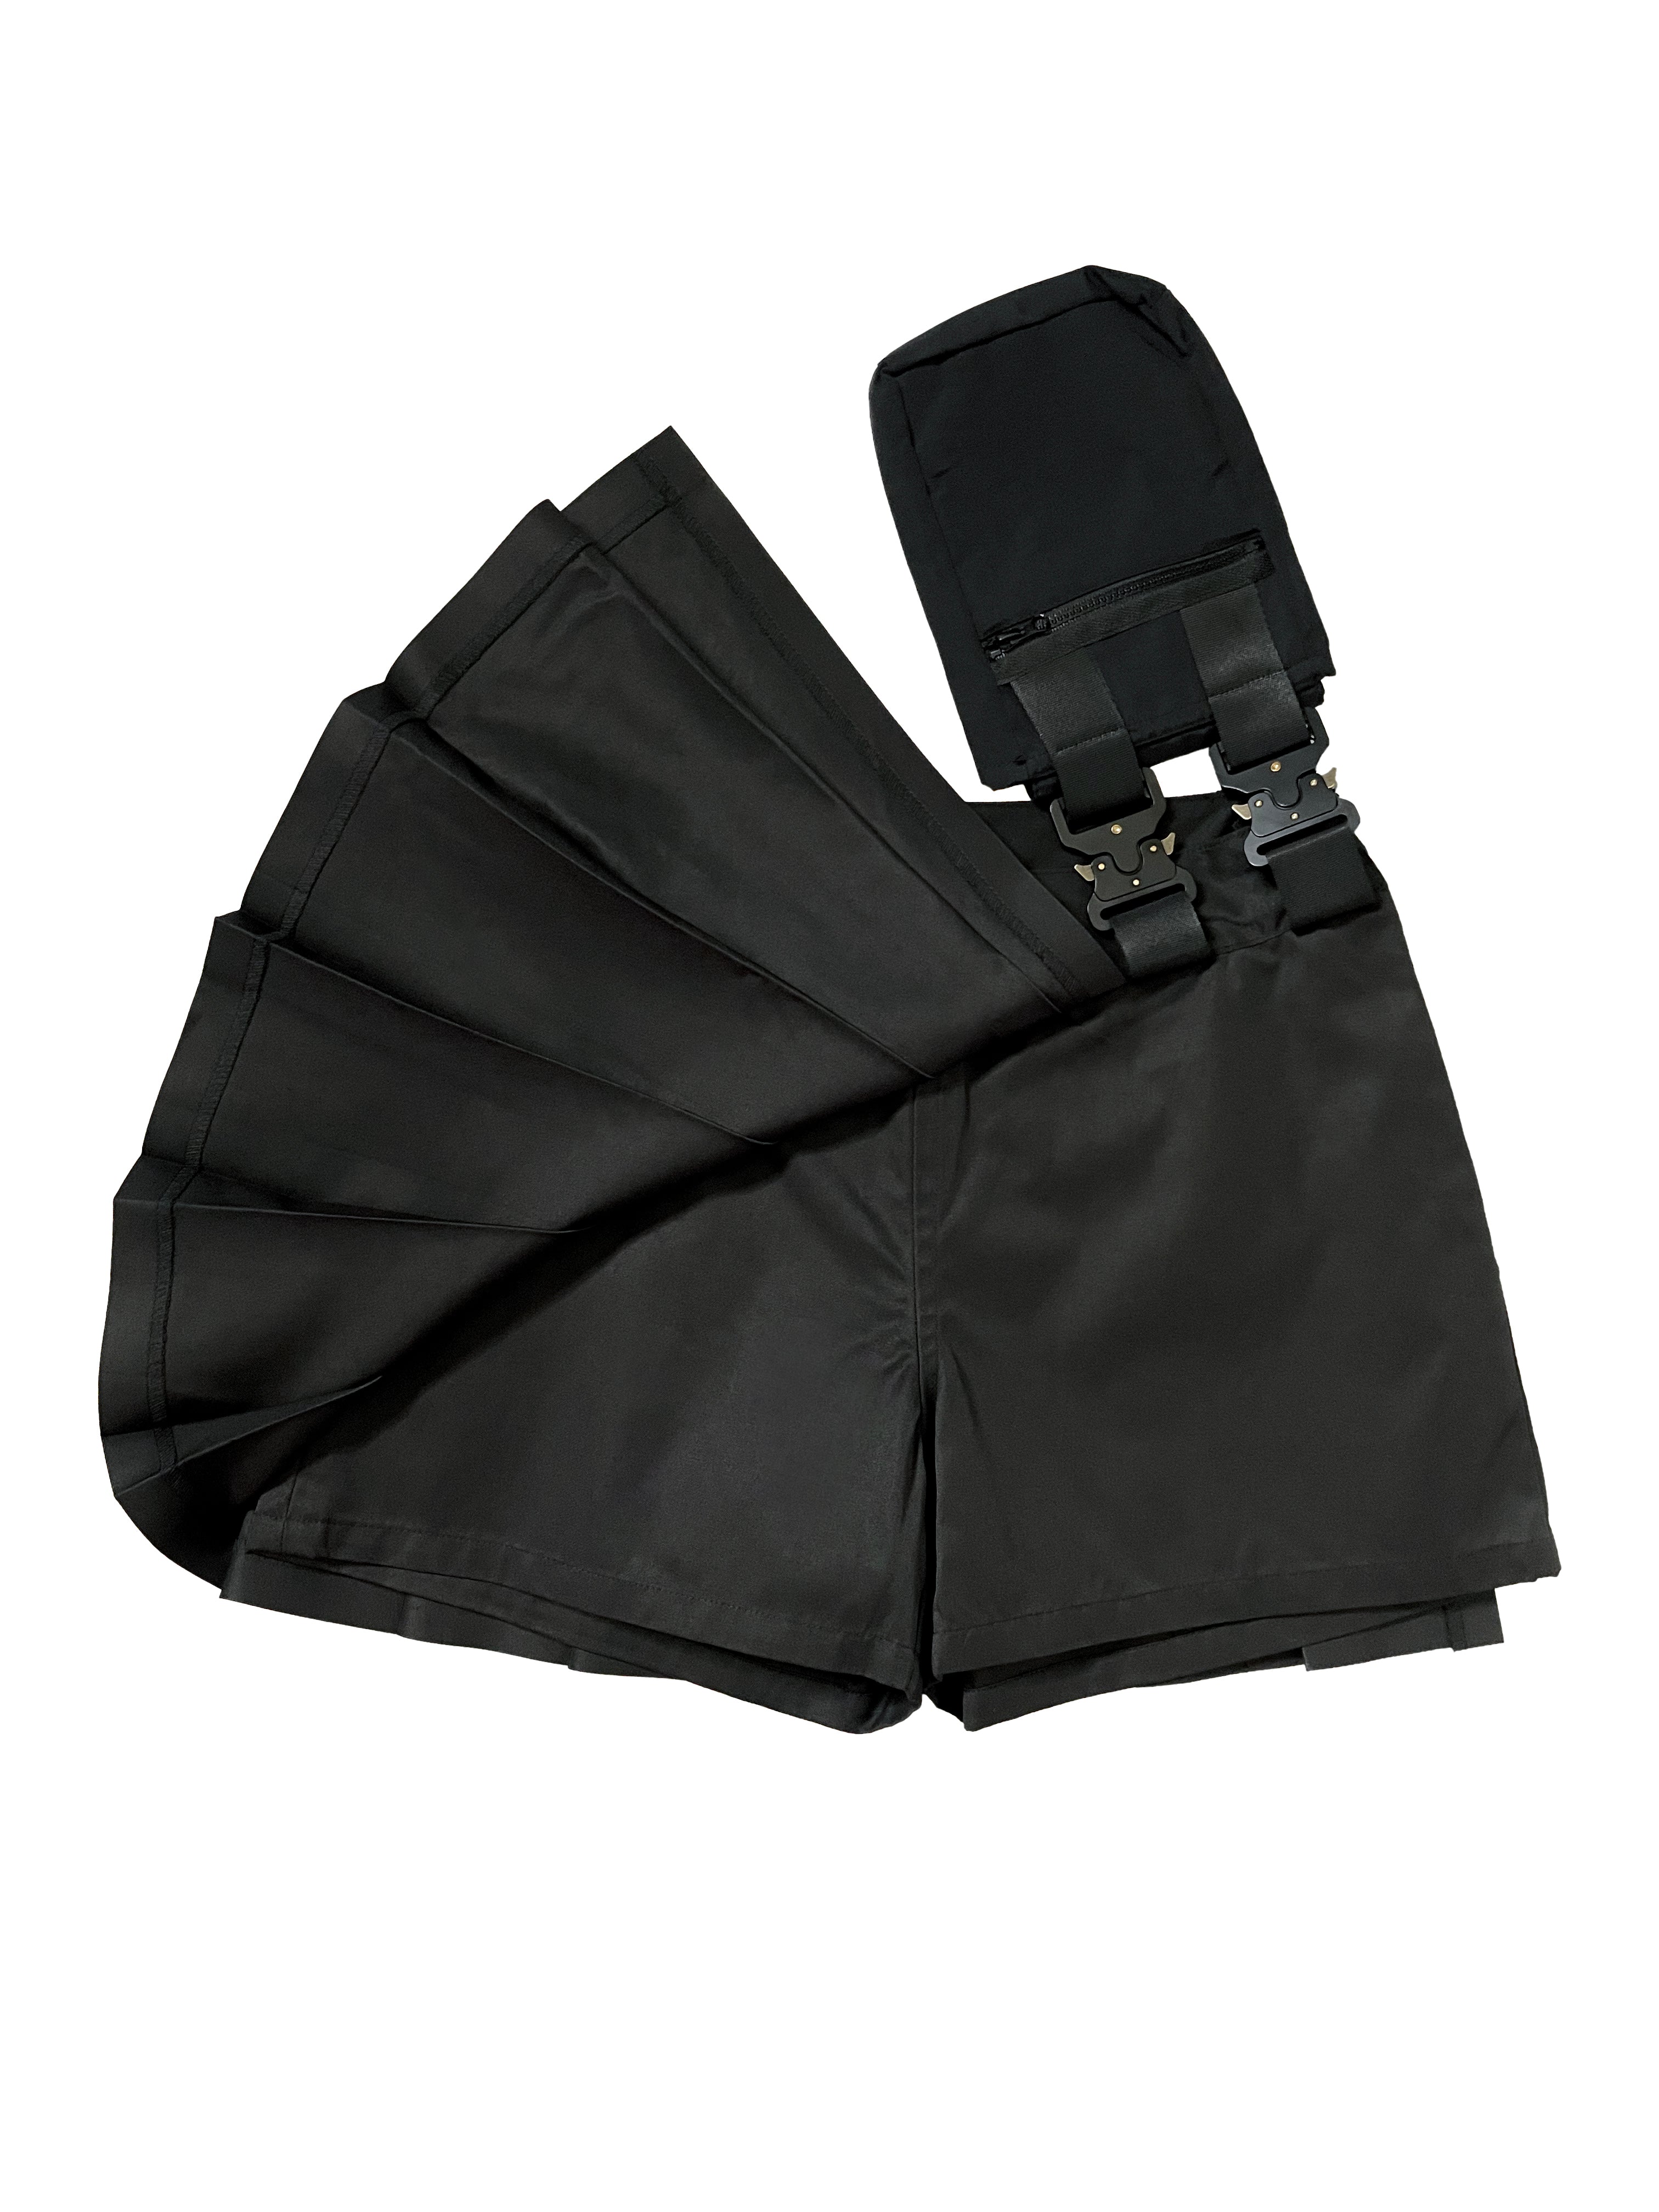 Corruption Arc Pleated Skirt (Inset Shorts) With Pouch